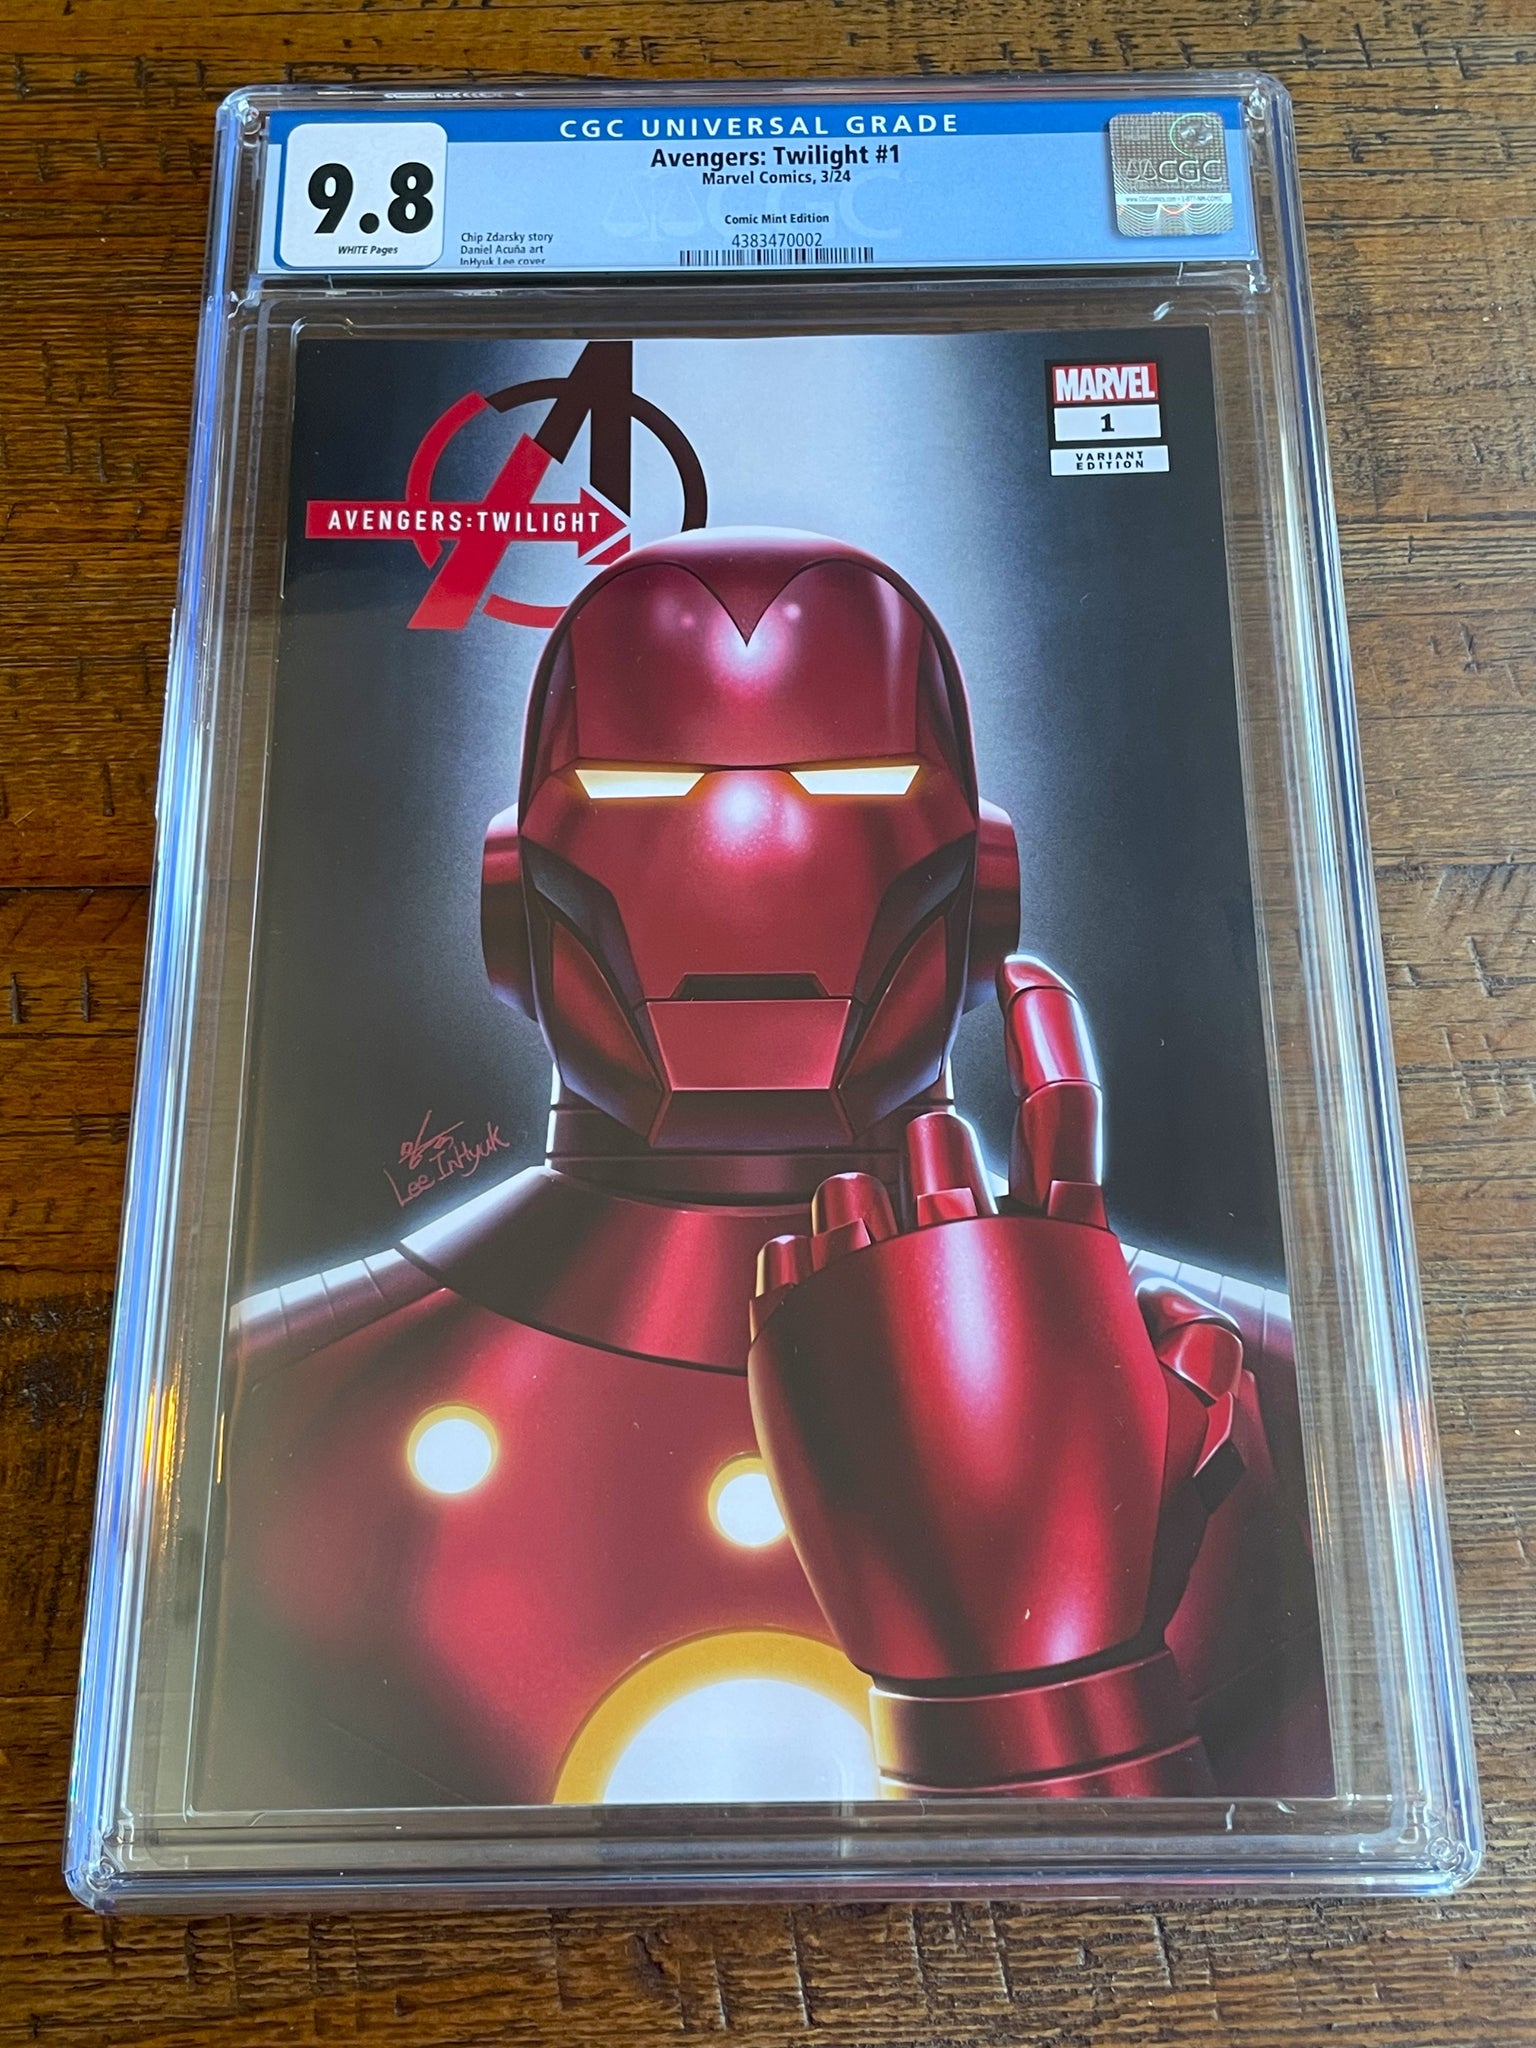 AVENGERS TWILIGHT #1 CGC 9.8 INHYUK LEE "RED" IRON MAN VARIANT LIMITED TO 500